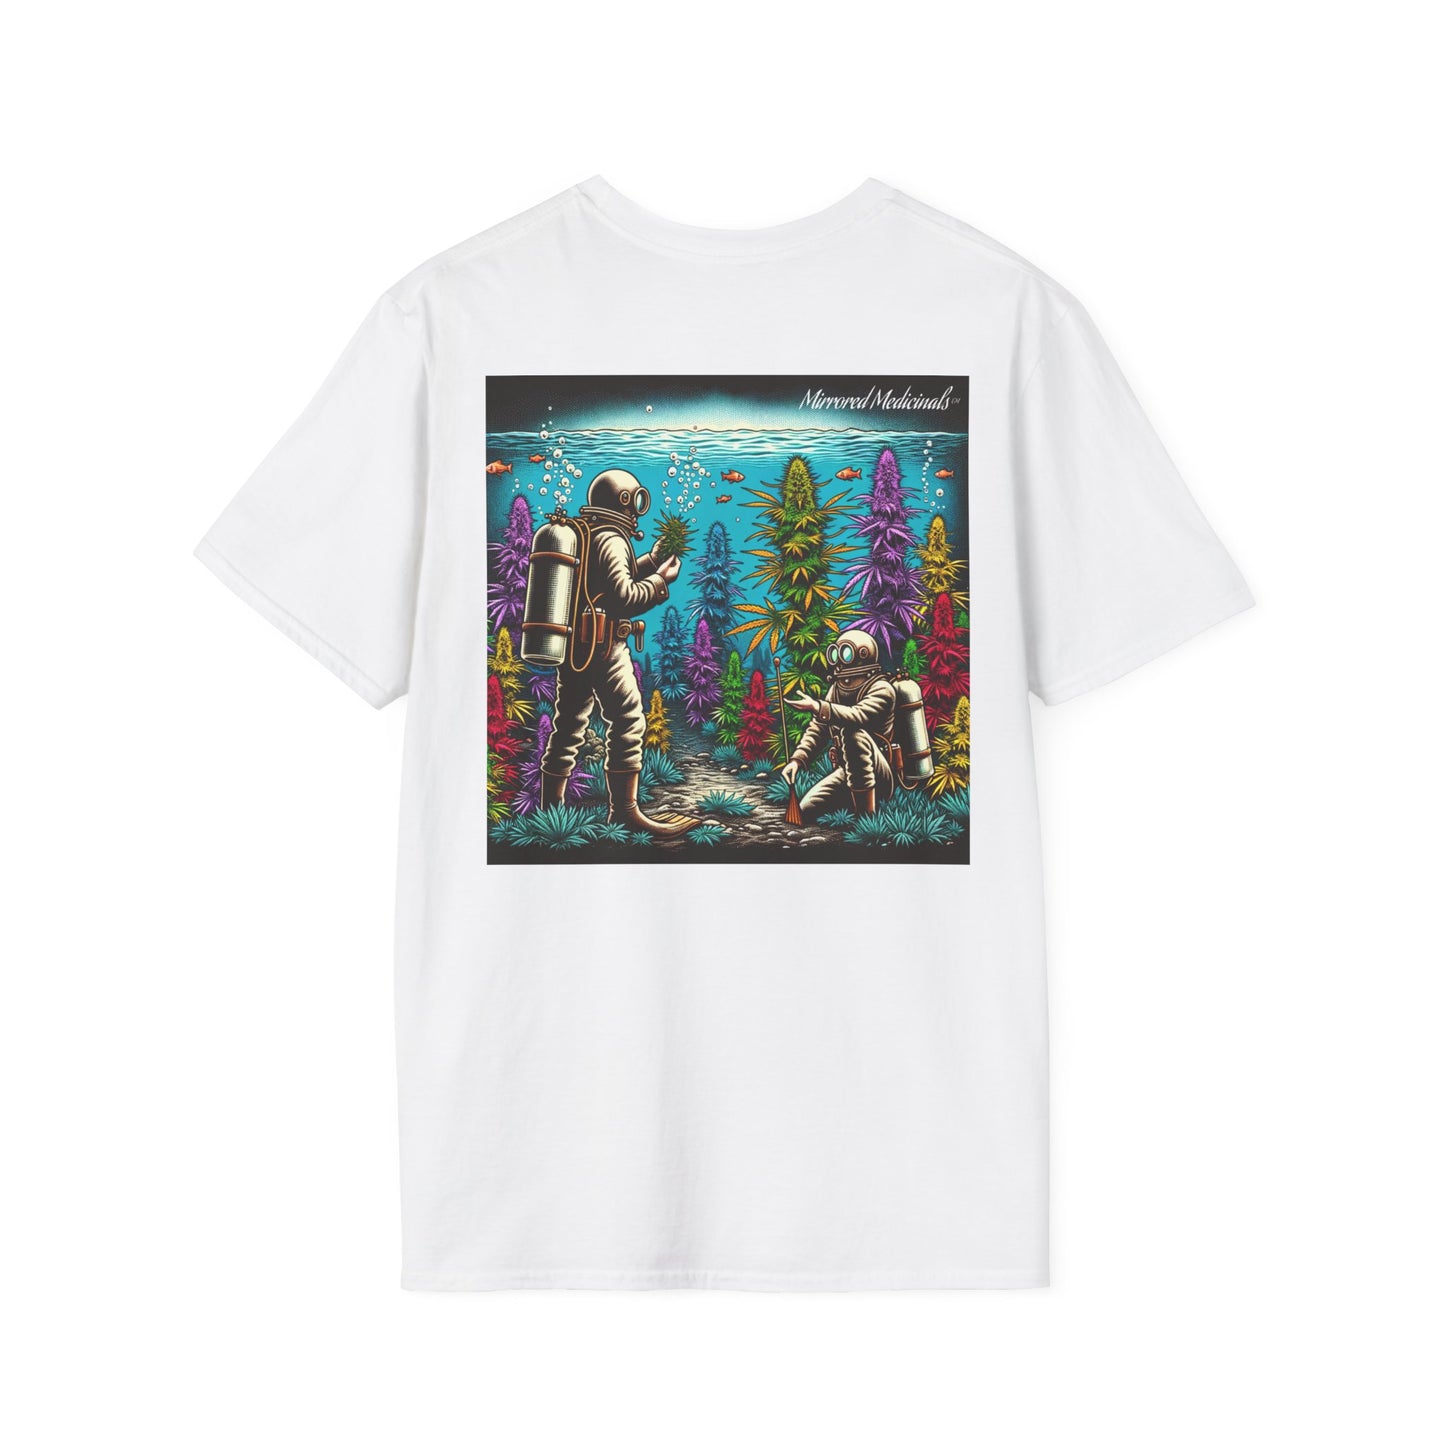 Sleeps in the Deep! 2 - Unisex Softstyle T-Shirt